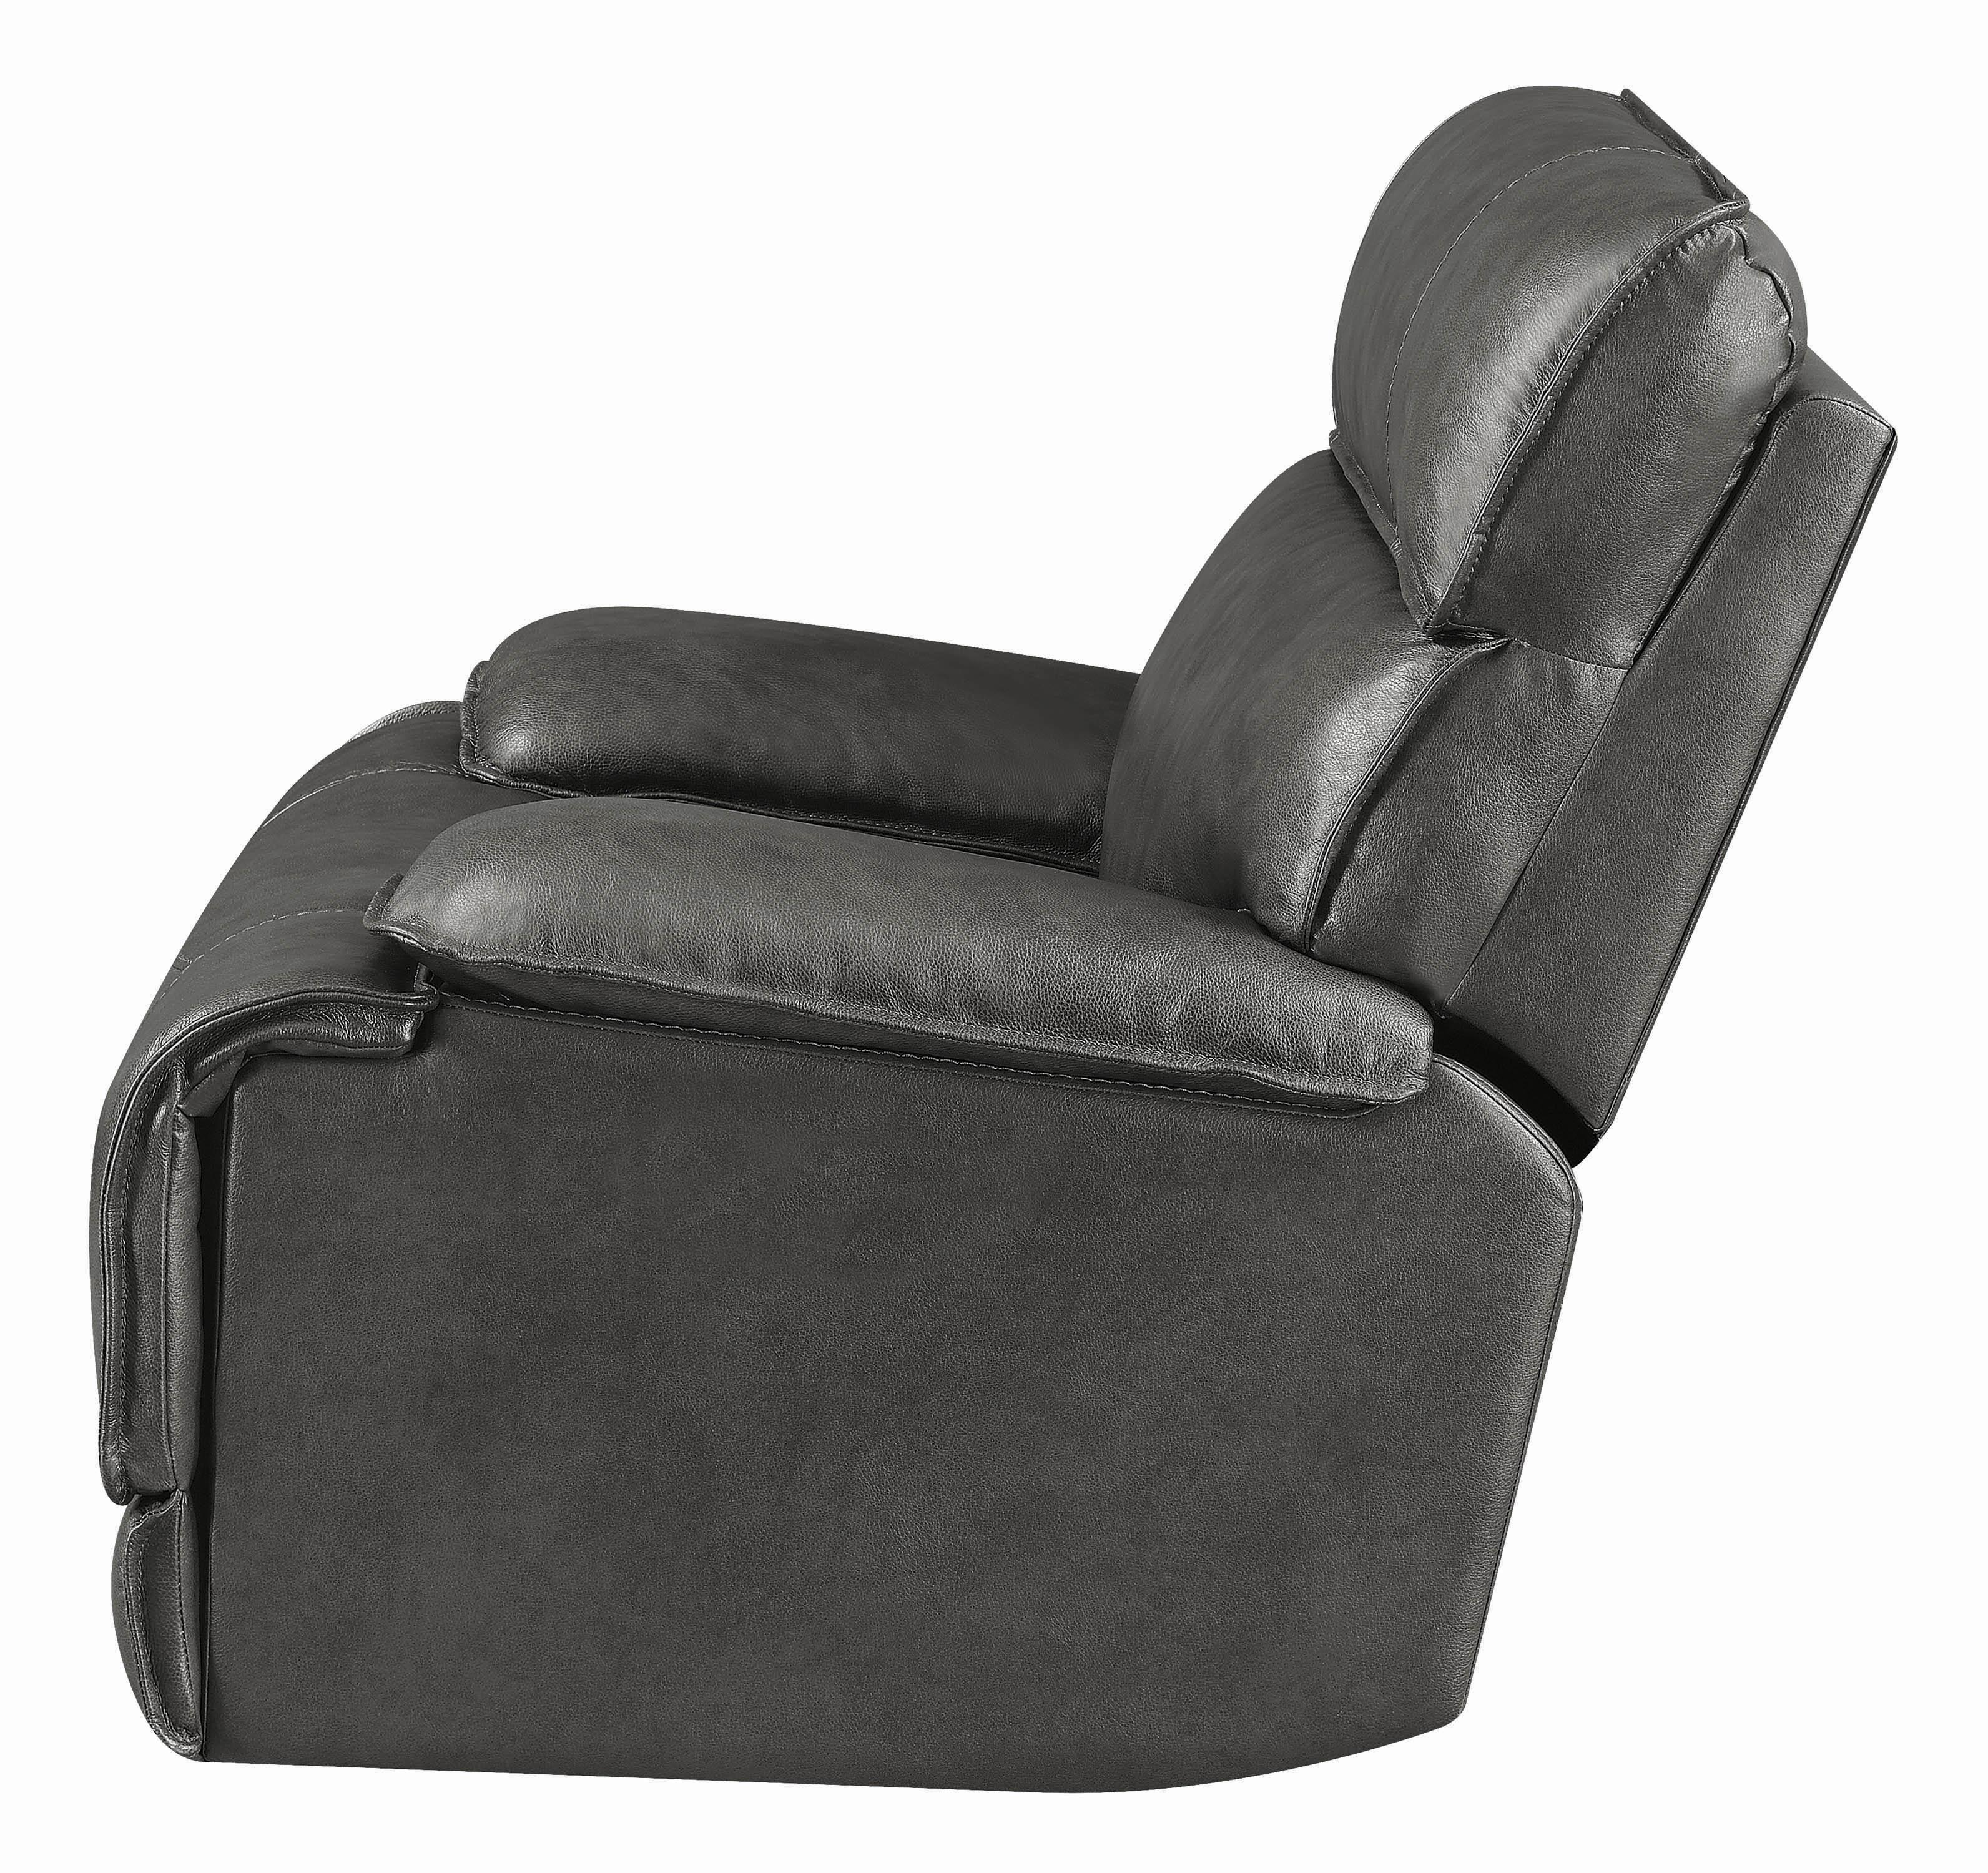 

        
Coaster Stanford Power2 glider recliner Gray Leather 021032454708
